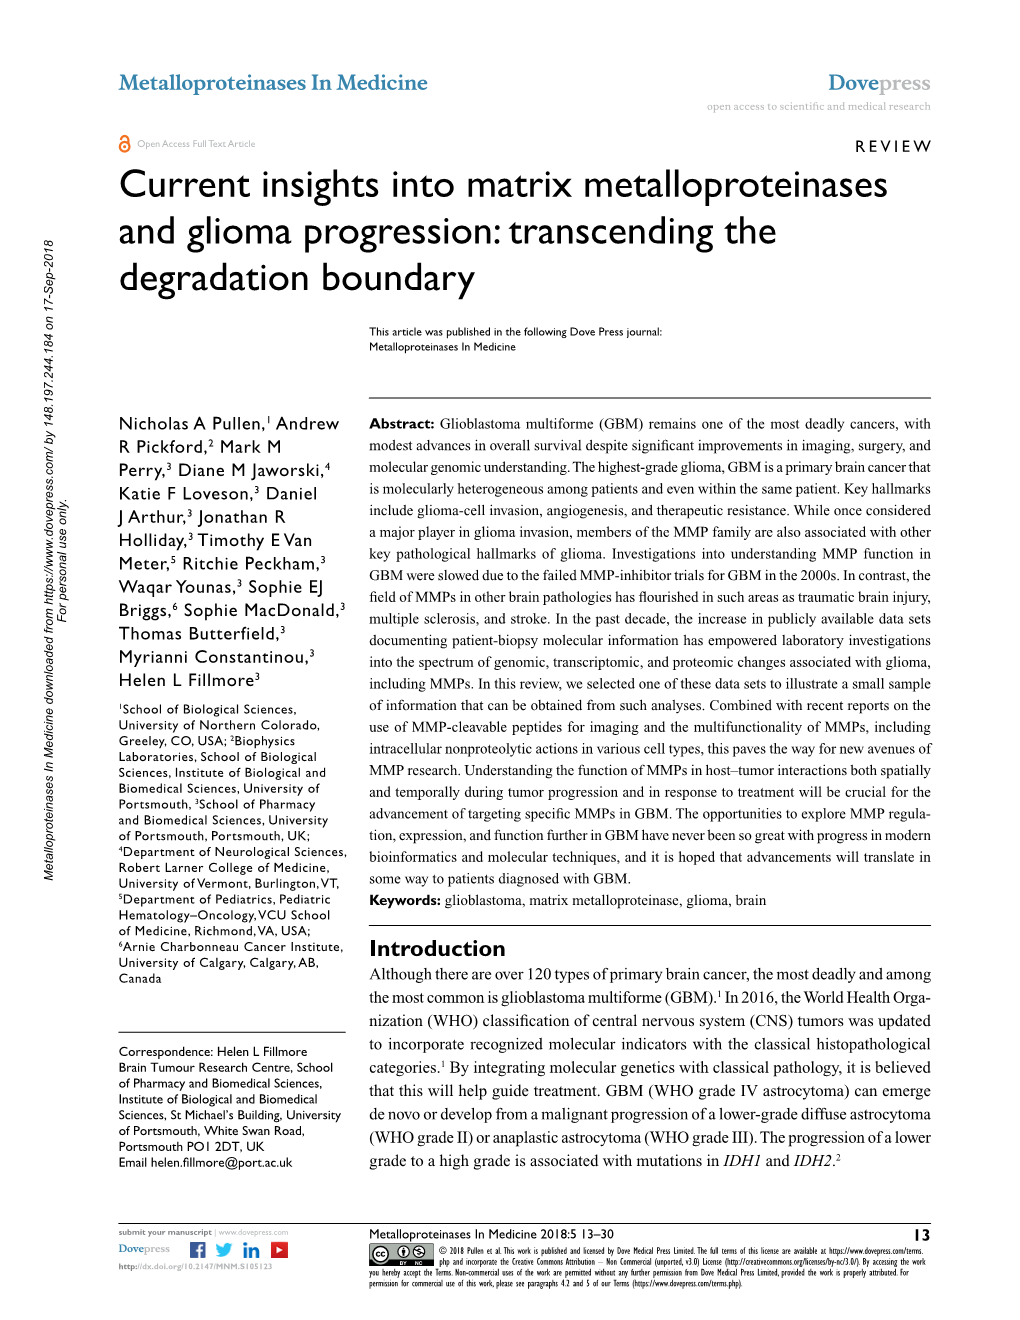 Current Insights Into Matrix Metalloproteinases and Glioma Progression: Transcending the Degradation Boundary